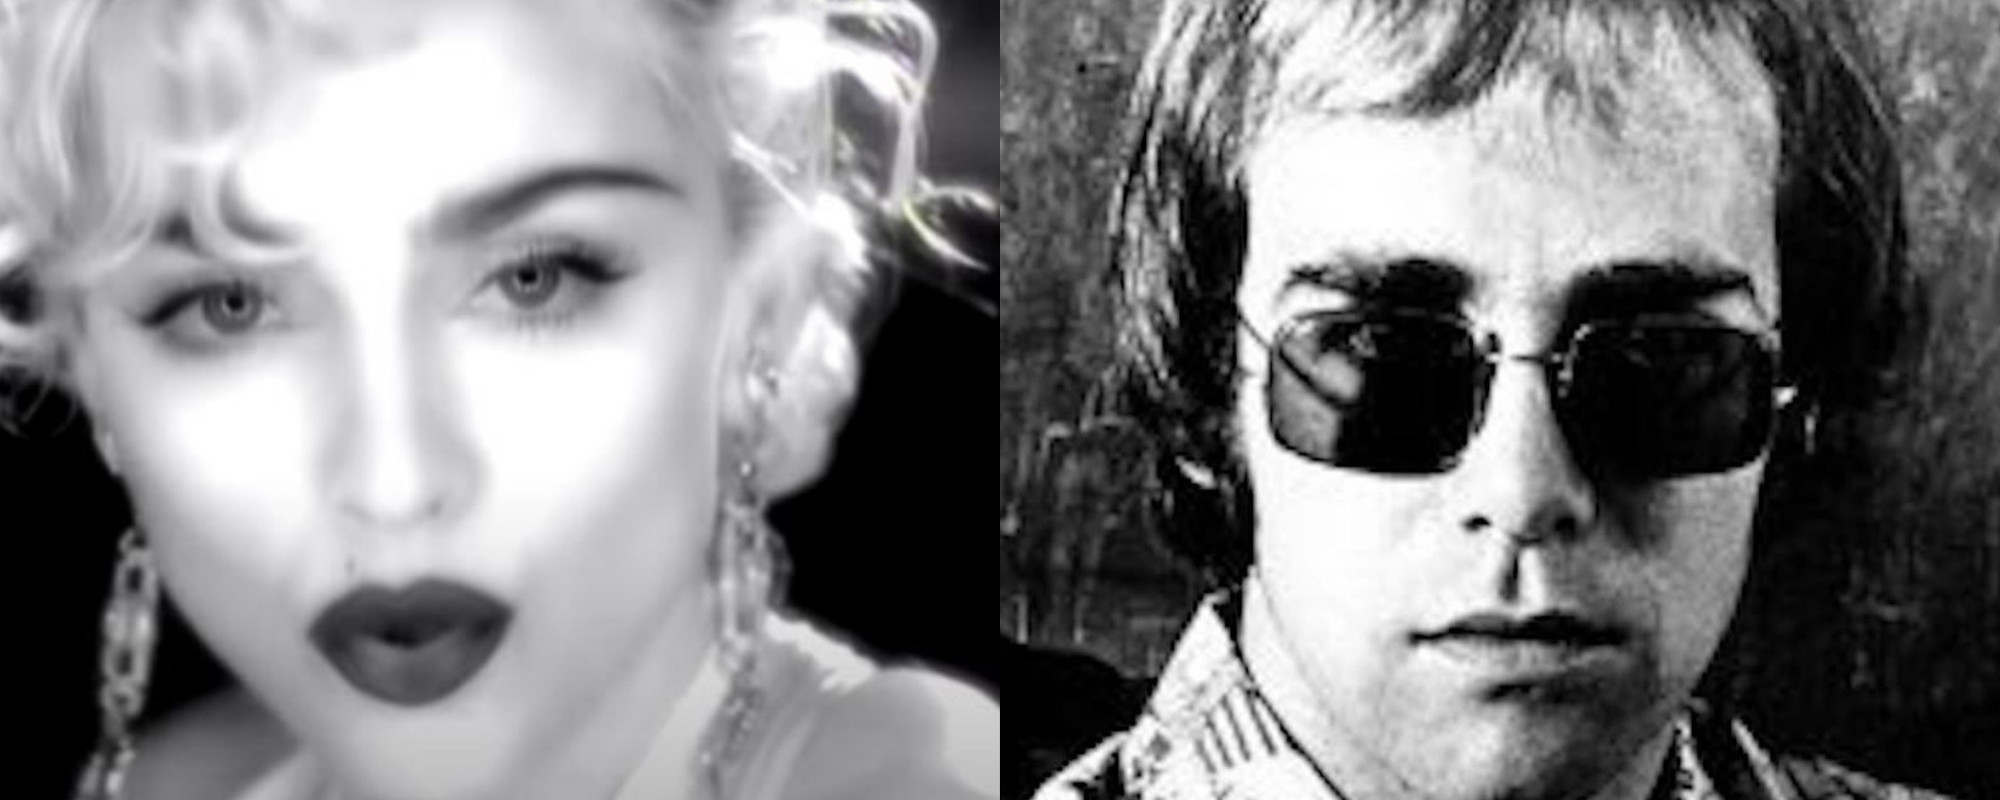 Behind the Beef: A Glance at the Years-Long Spat Between Madonna & Elton John